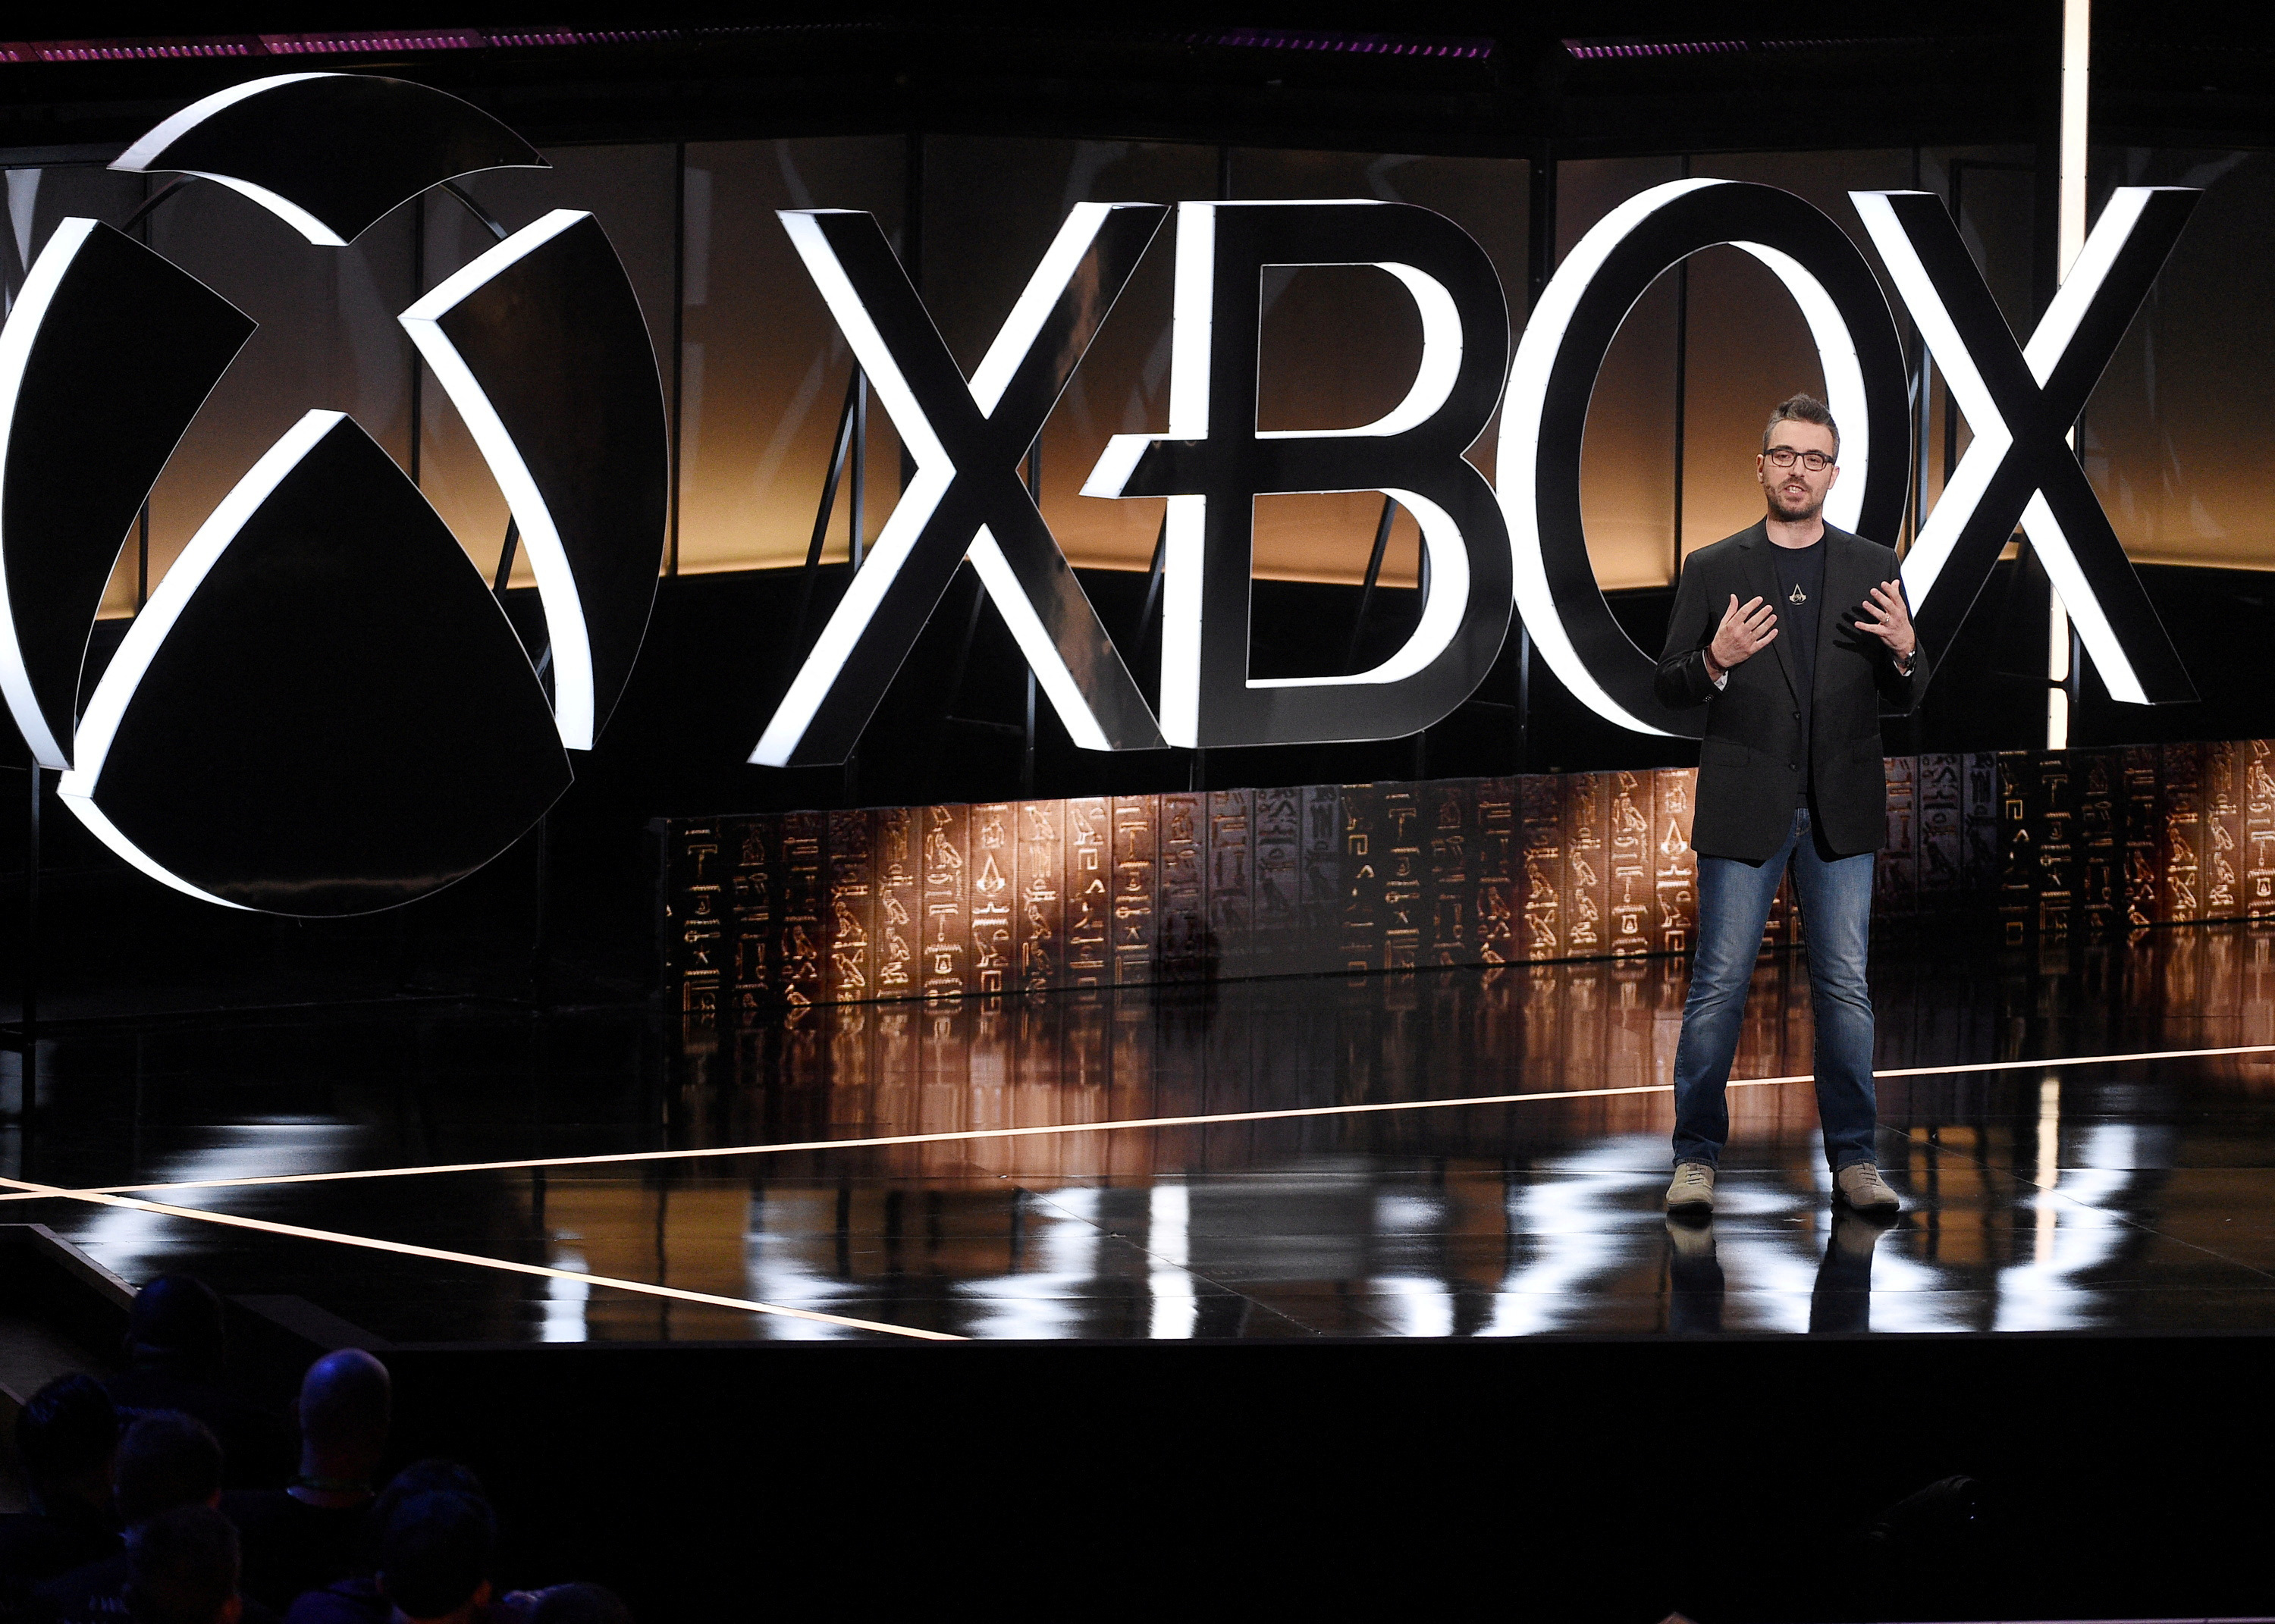 Jean Guesdon, Creative Director at Ubisoft Montreal, speaks during the Microsoft Xbox E3 2017 media briefing in Los Angeles